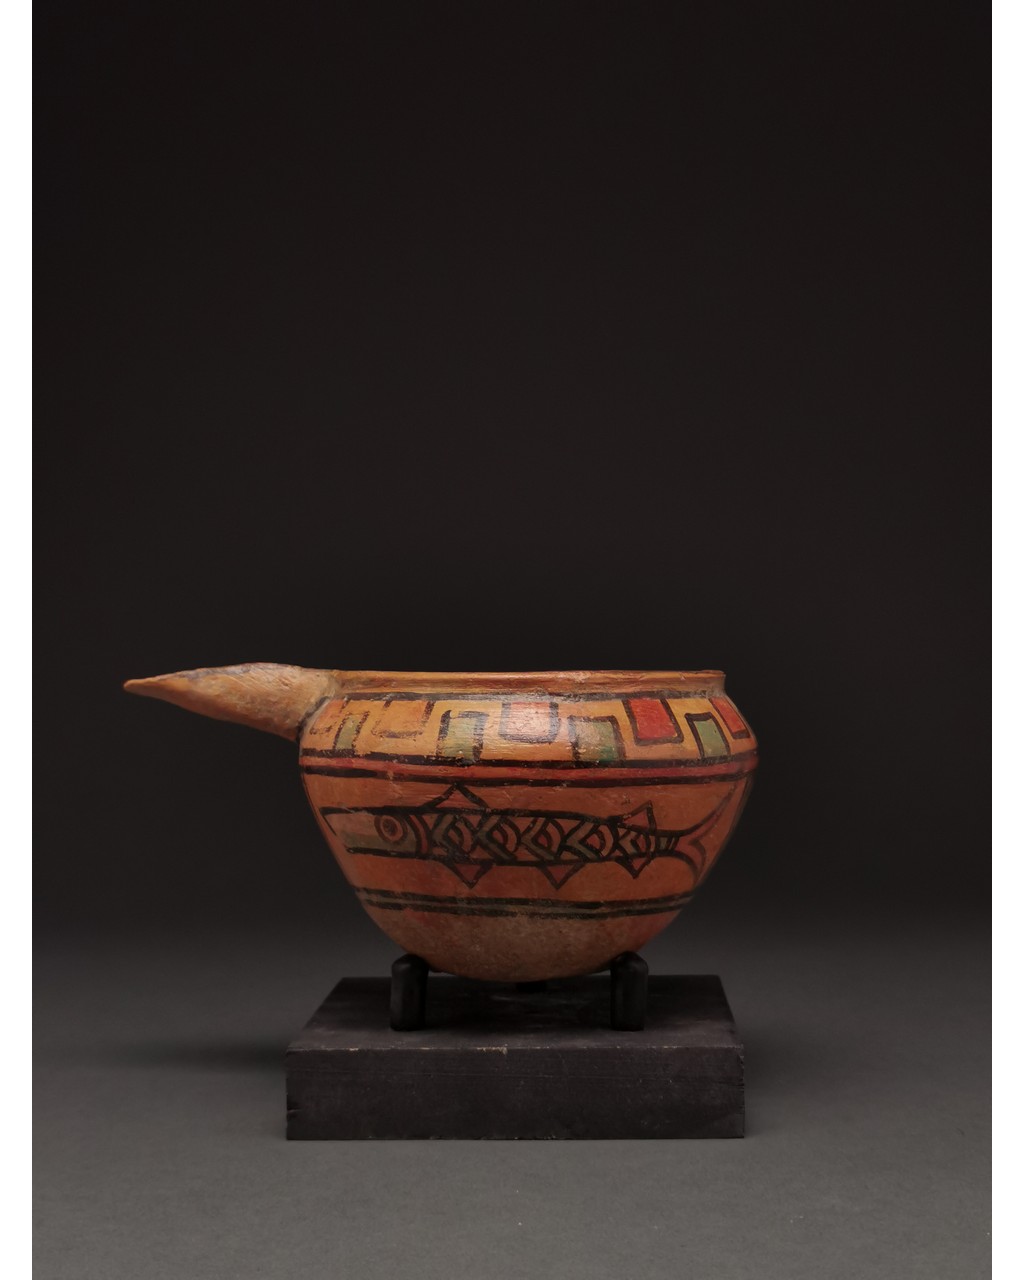 INDUS VALLEY, PAINTED POTTERY VESSEL WITH ANIMALS - Image 2 of 6